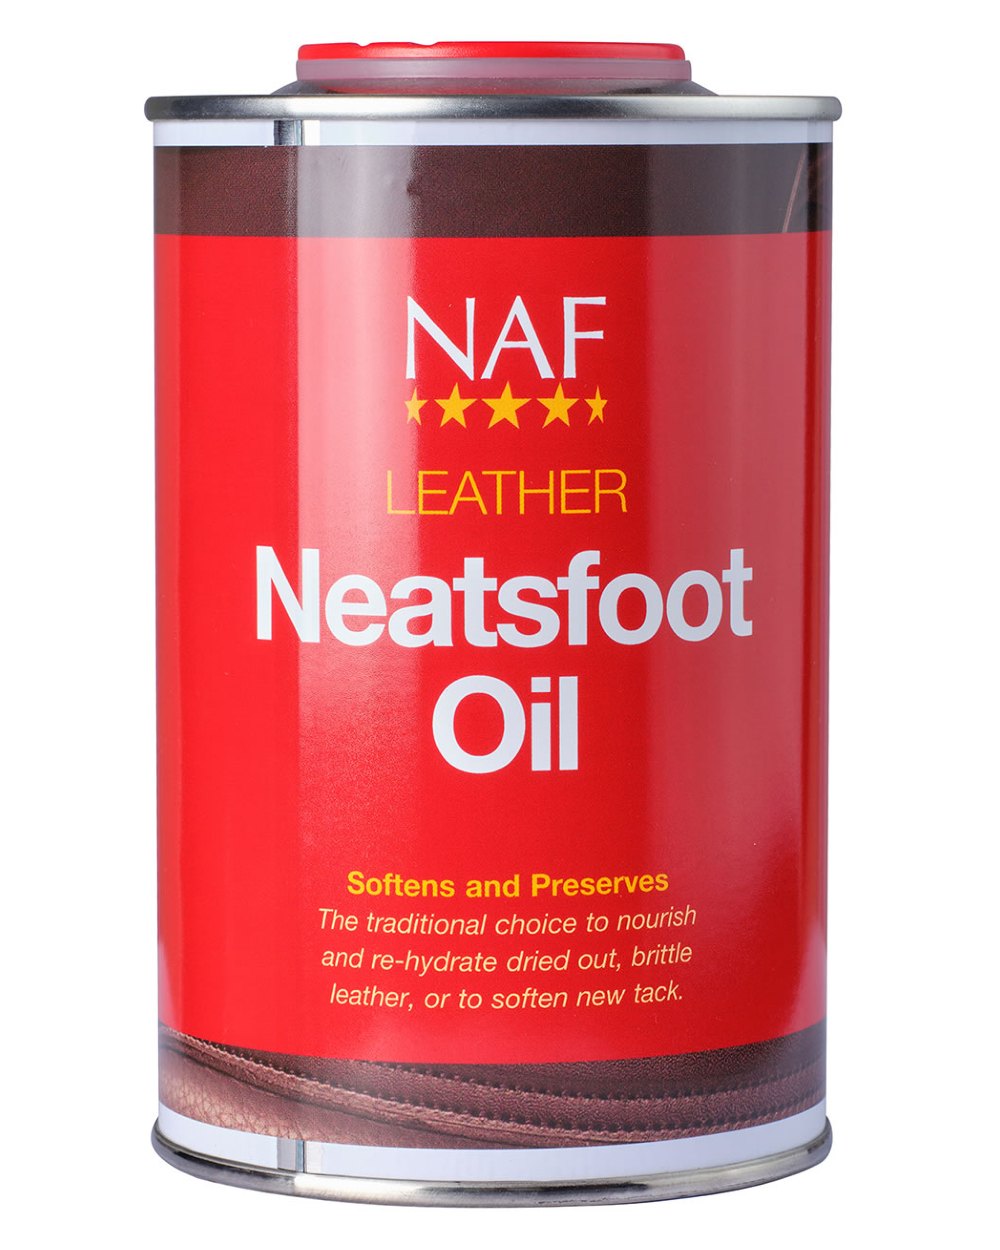 NAF Leather Neatsfoot Oil 500ml on white background